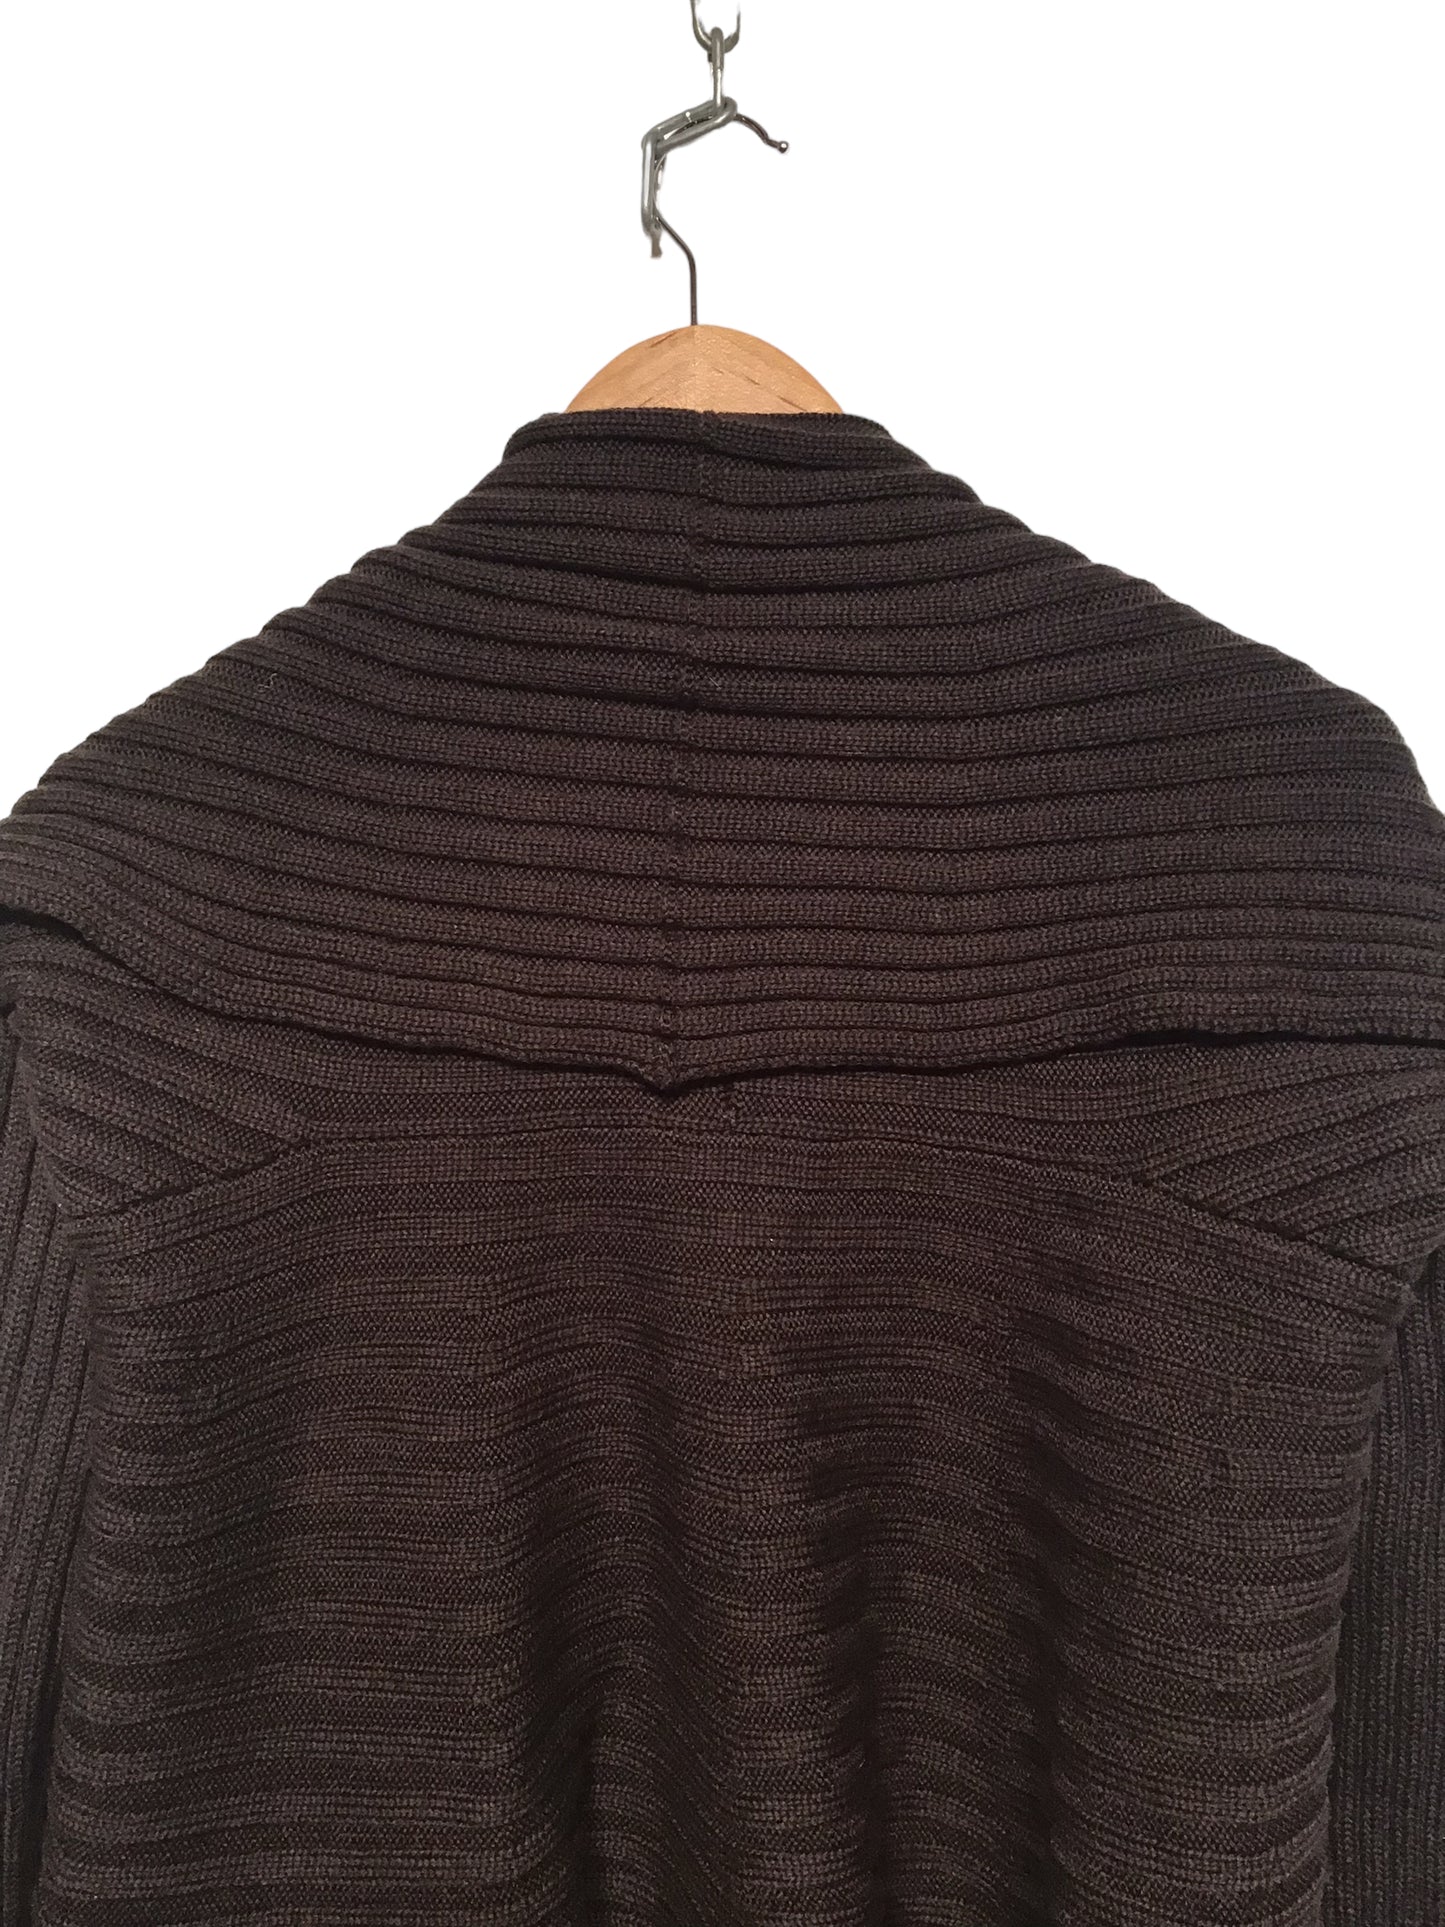 Brown Knitted Cardigan (Size M)